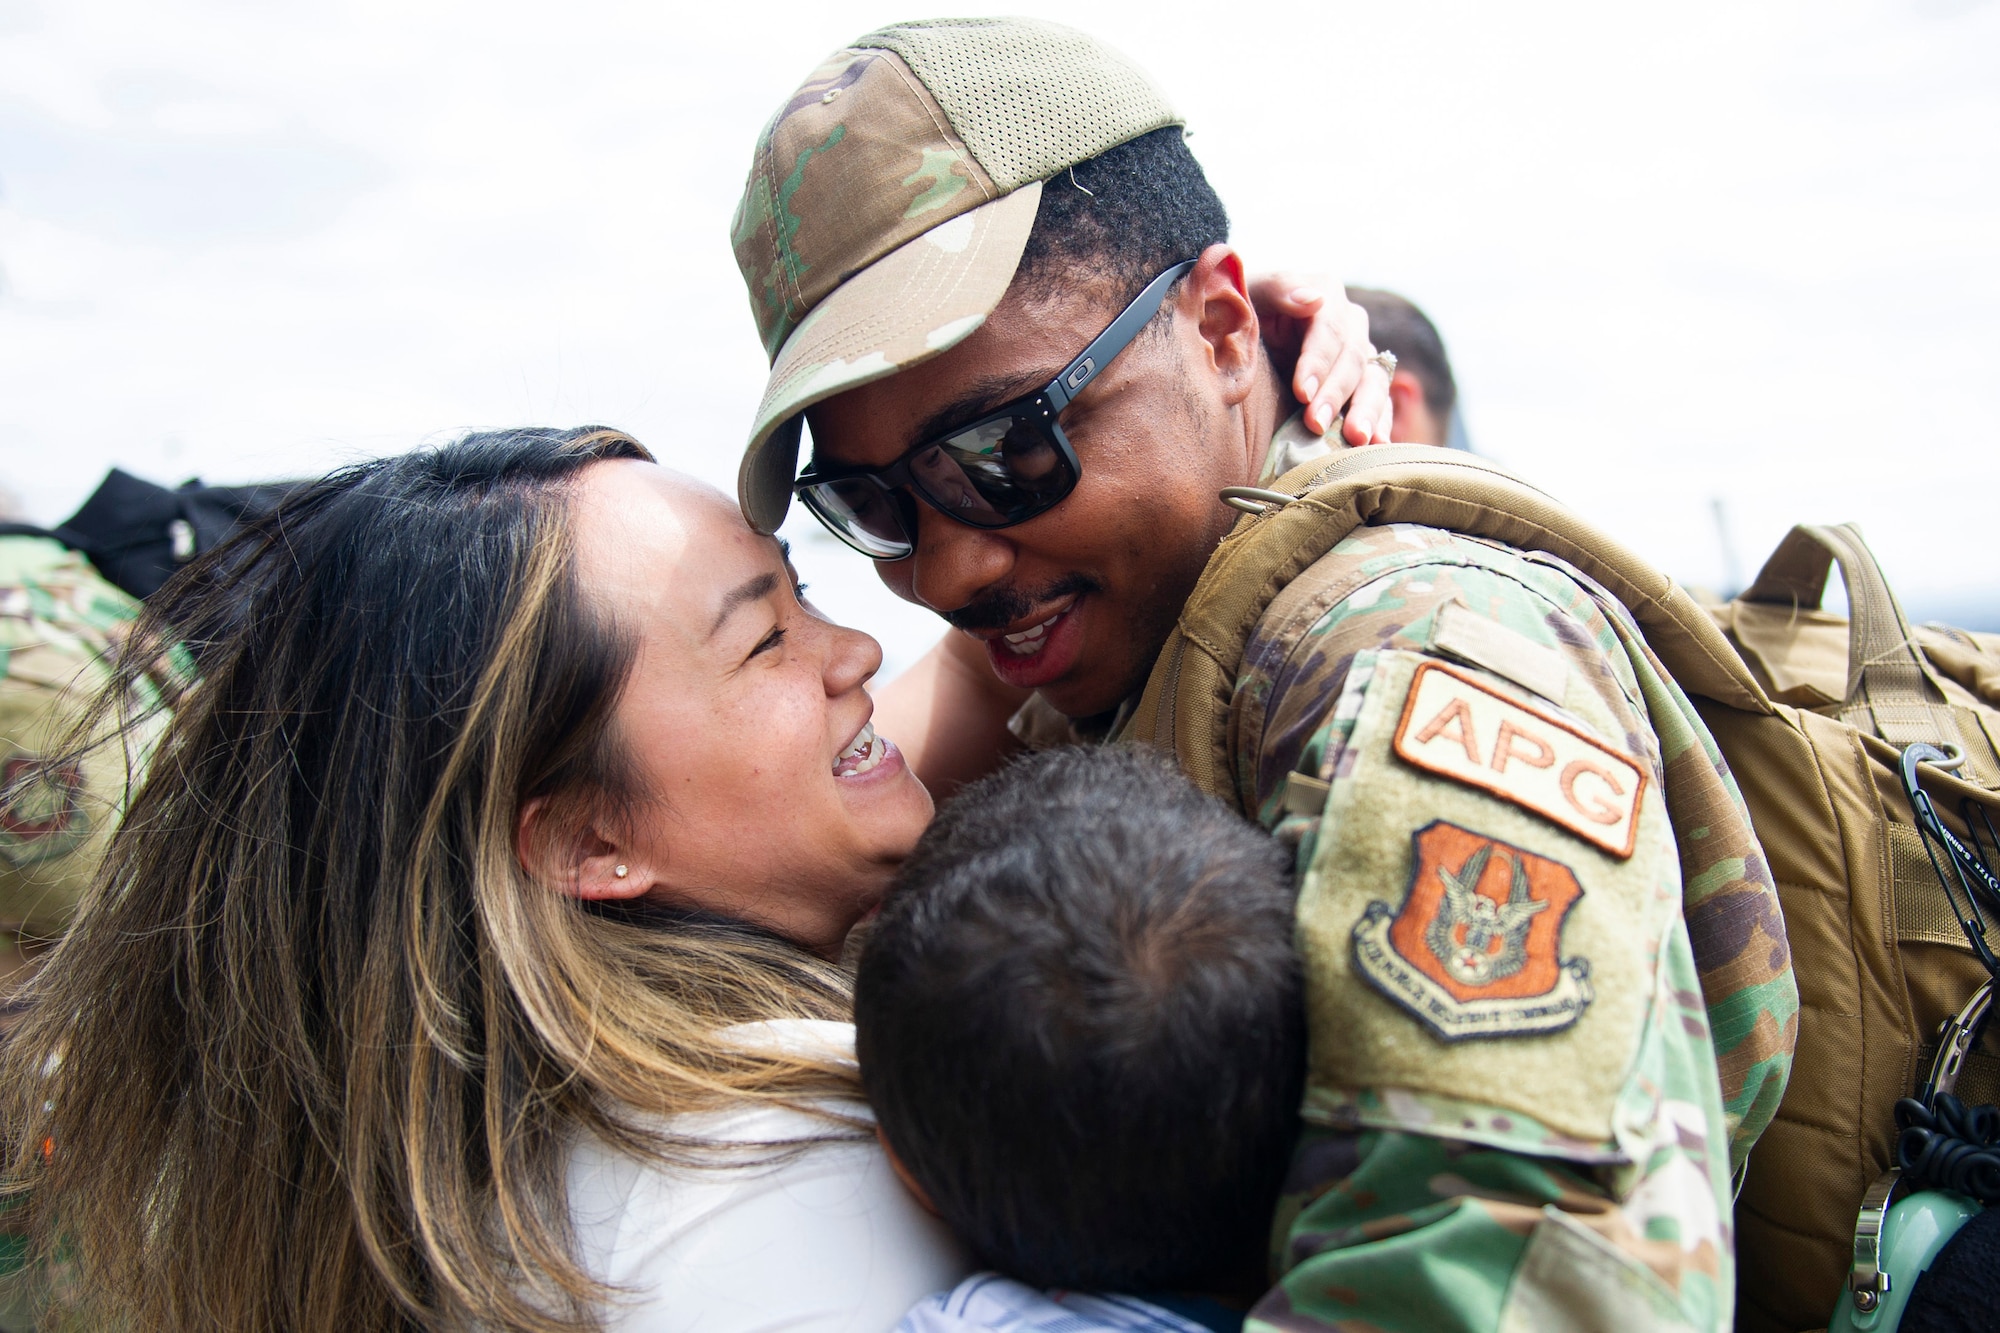 Staff Sgt. Darrell Anderson, 934th Aircraft Maintenance Squadron, hugs his wife, Felicia and son